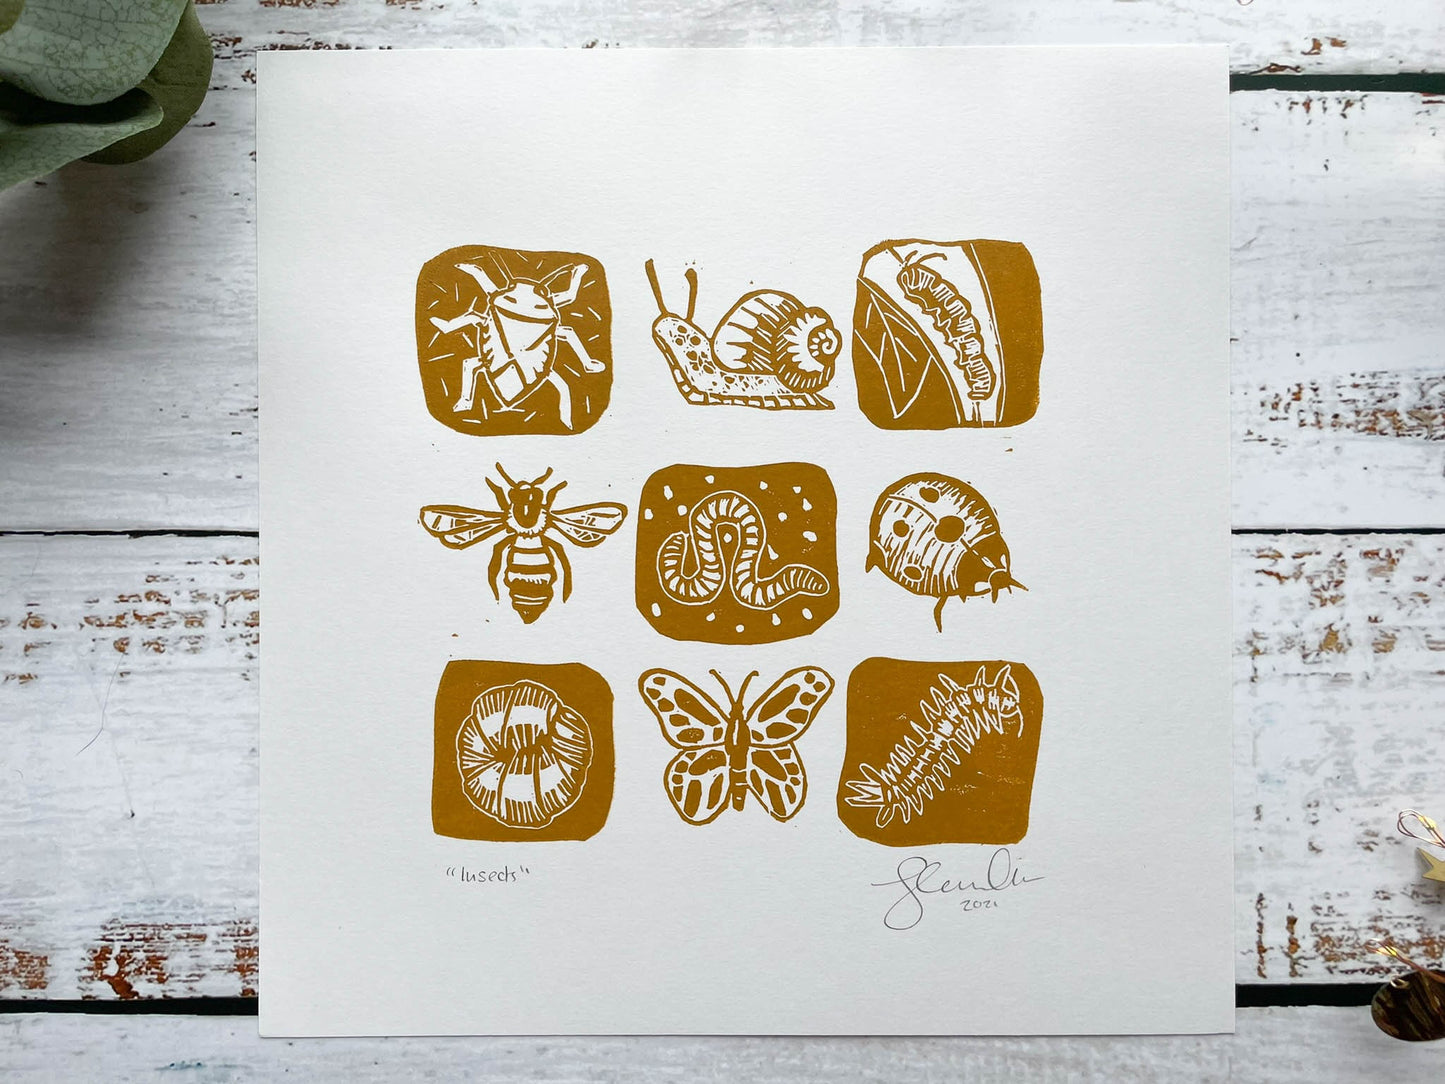 A lino print of a 3 x 3 grid of mini-beasts in yellow ochre